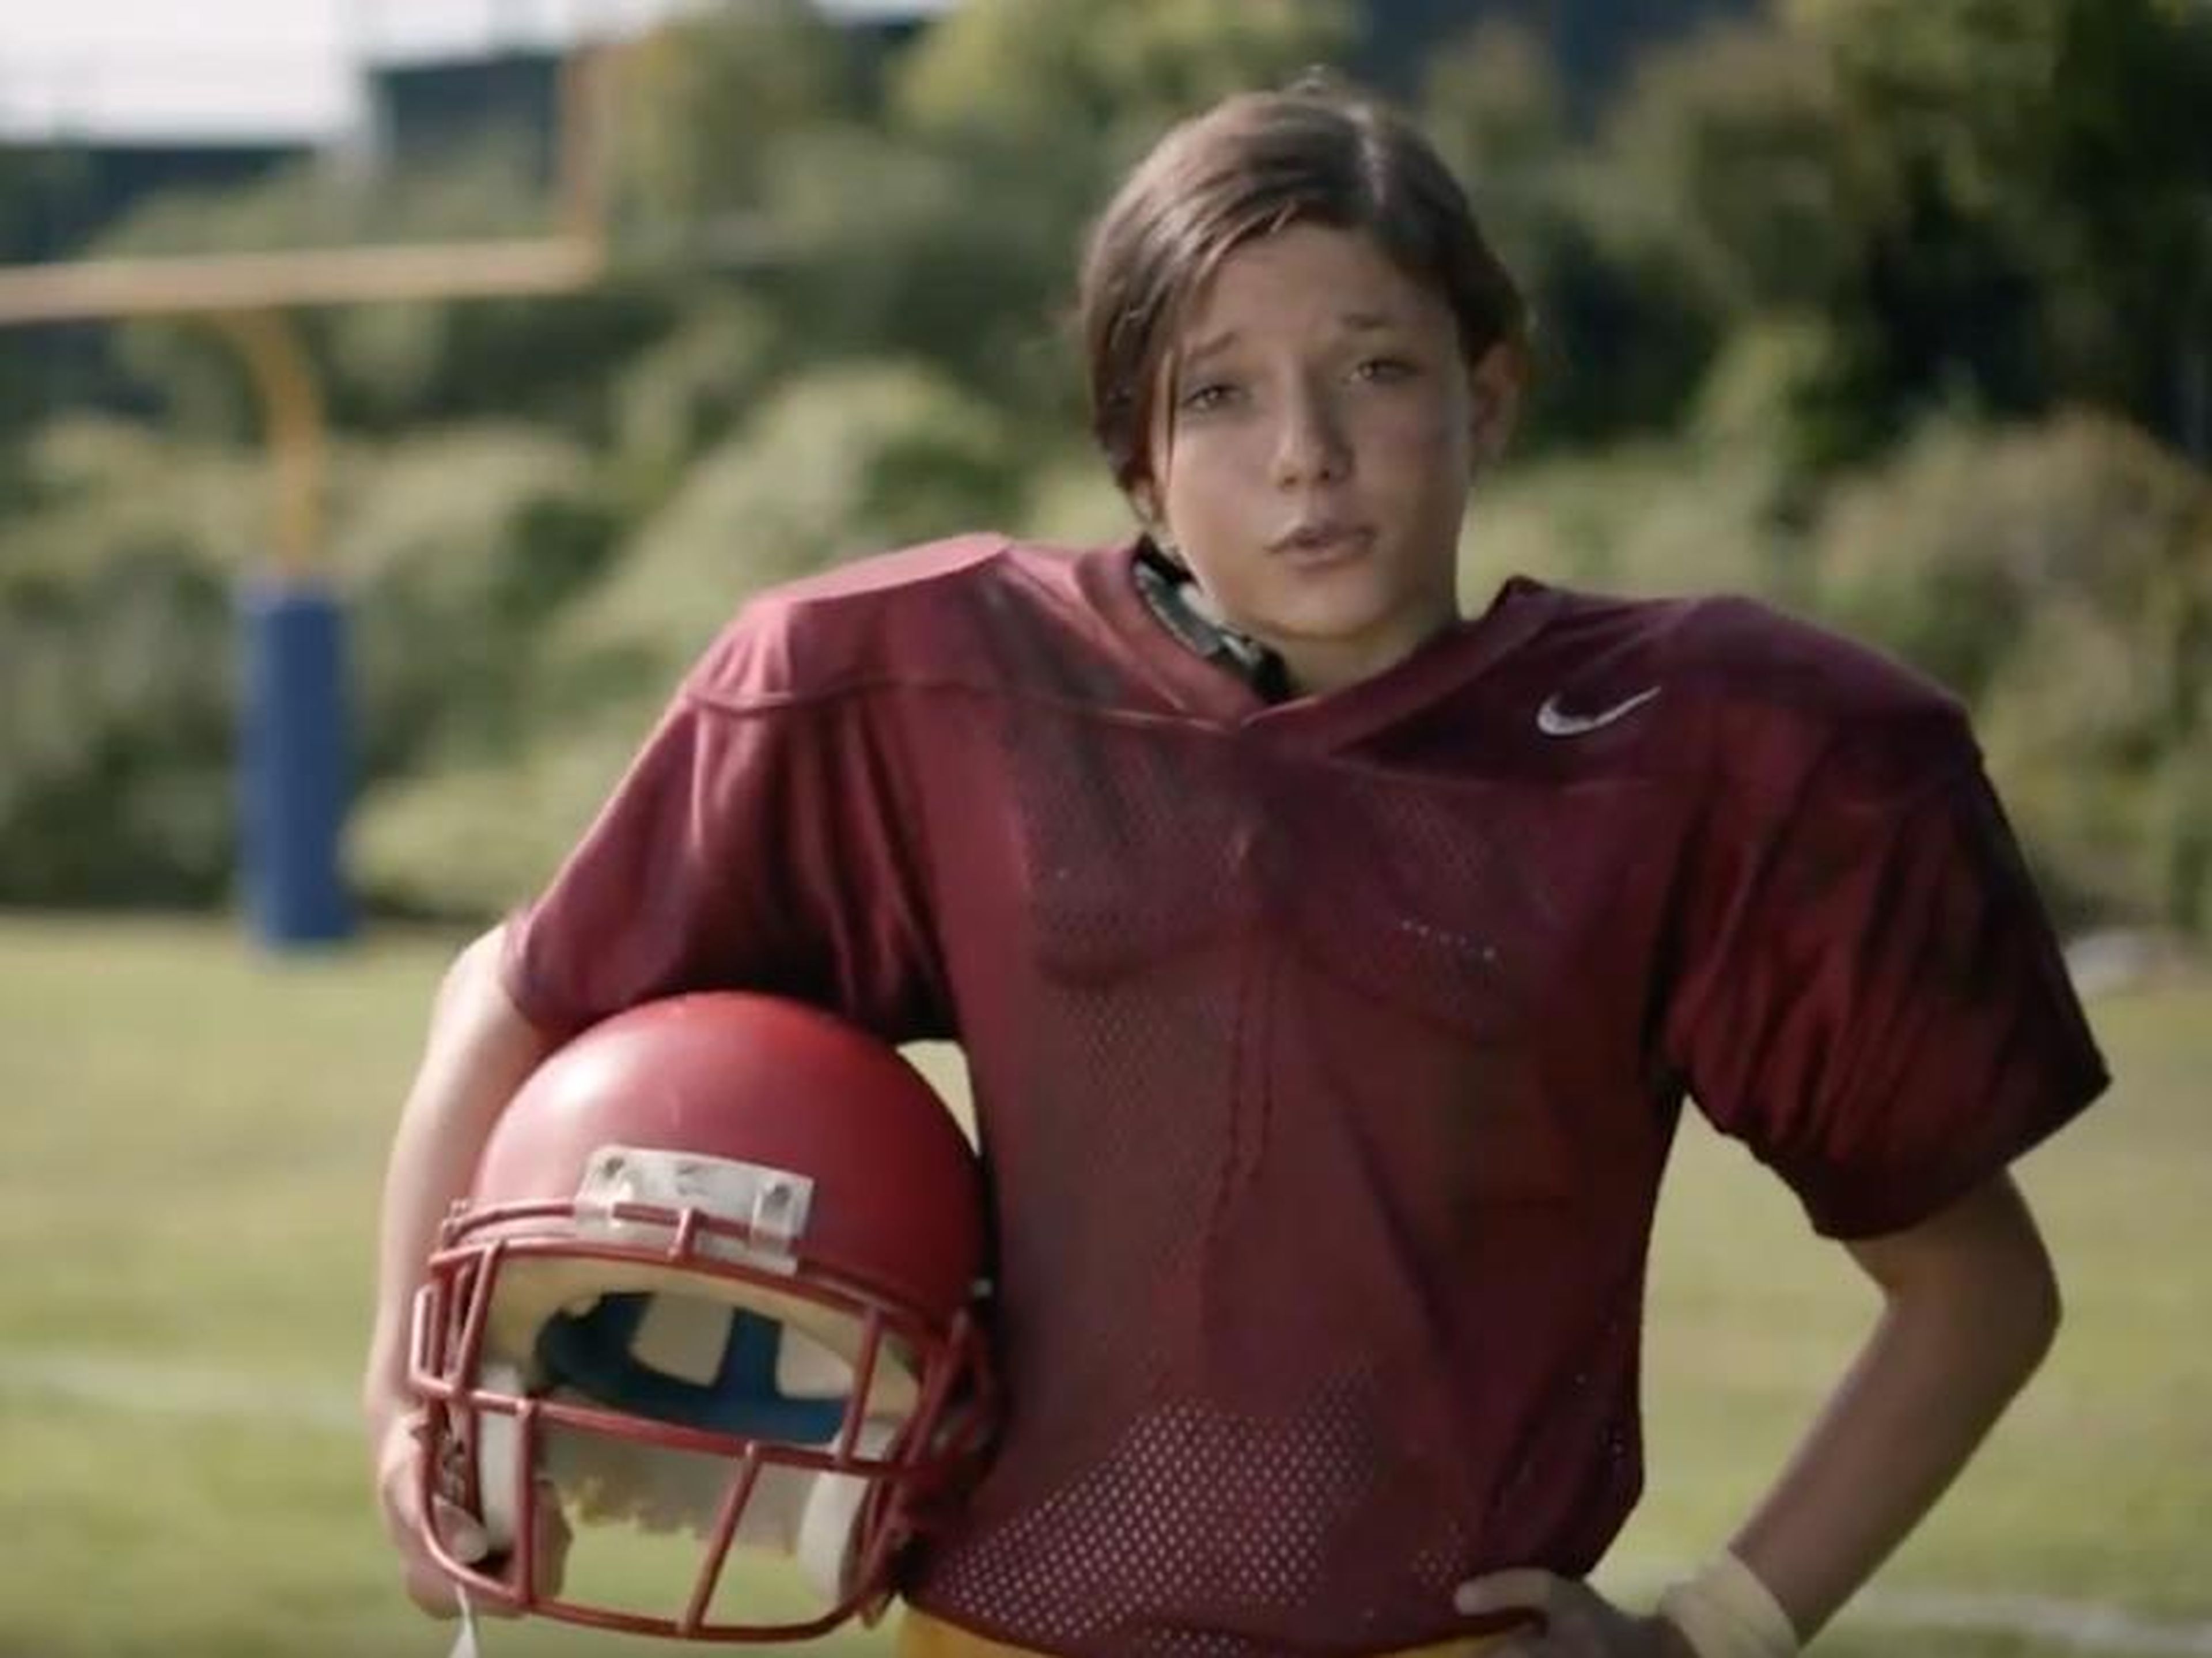 Nike touched on gender issues again in 2012 with its "Voices" ad, which celebrated the 40th anniversary of Title IX.